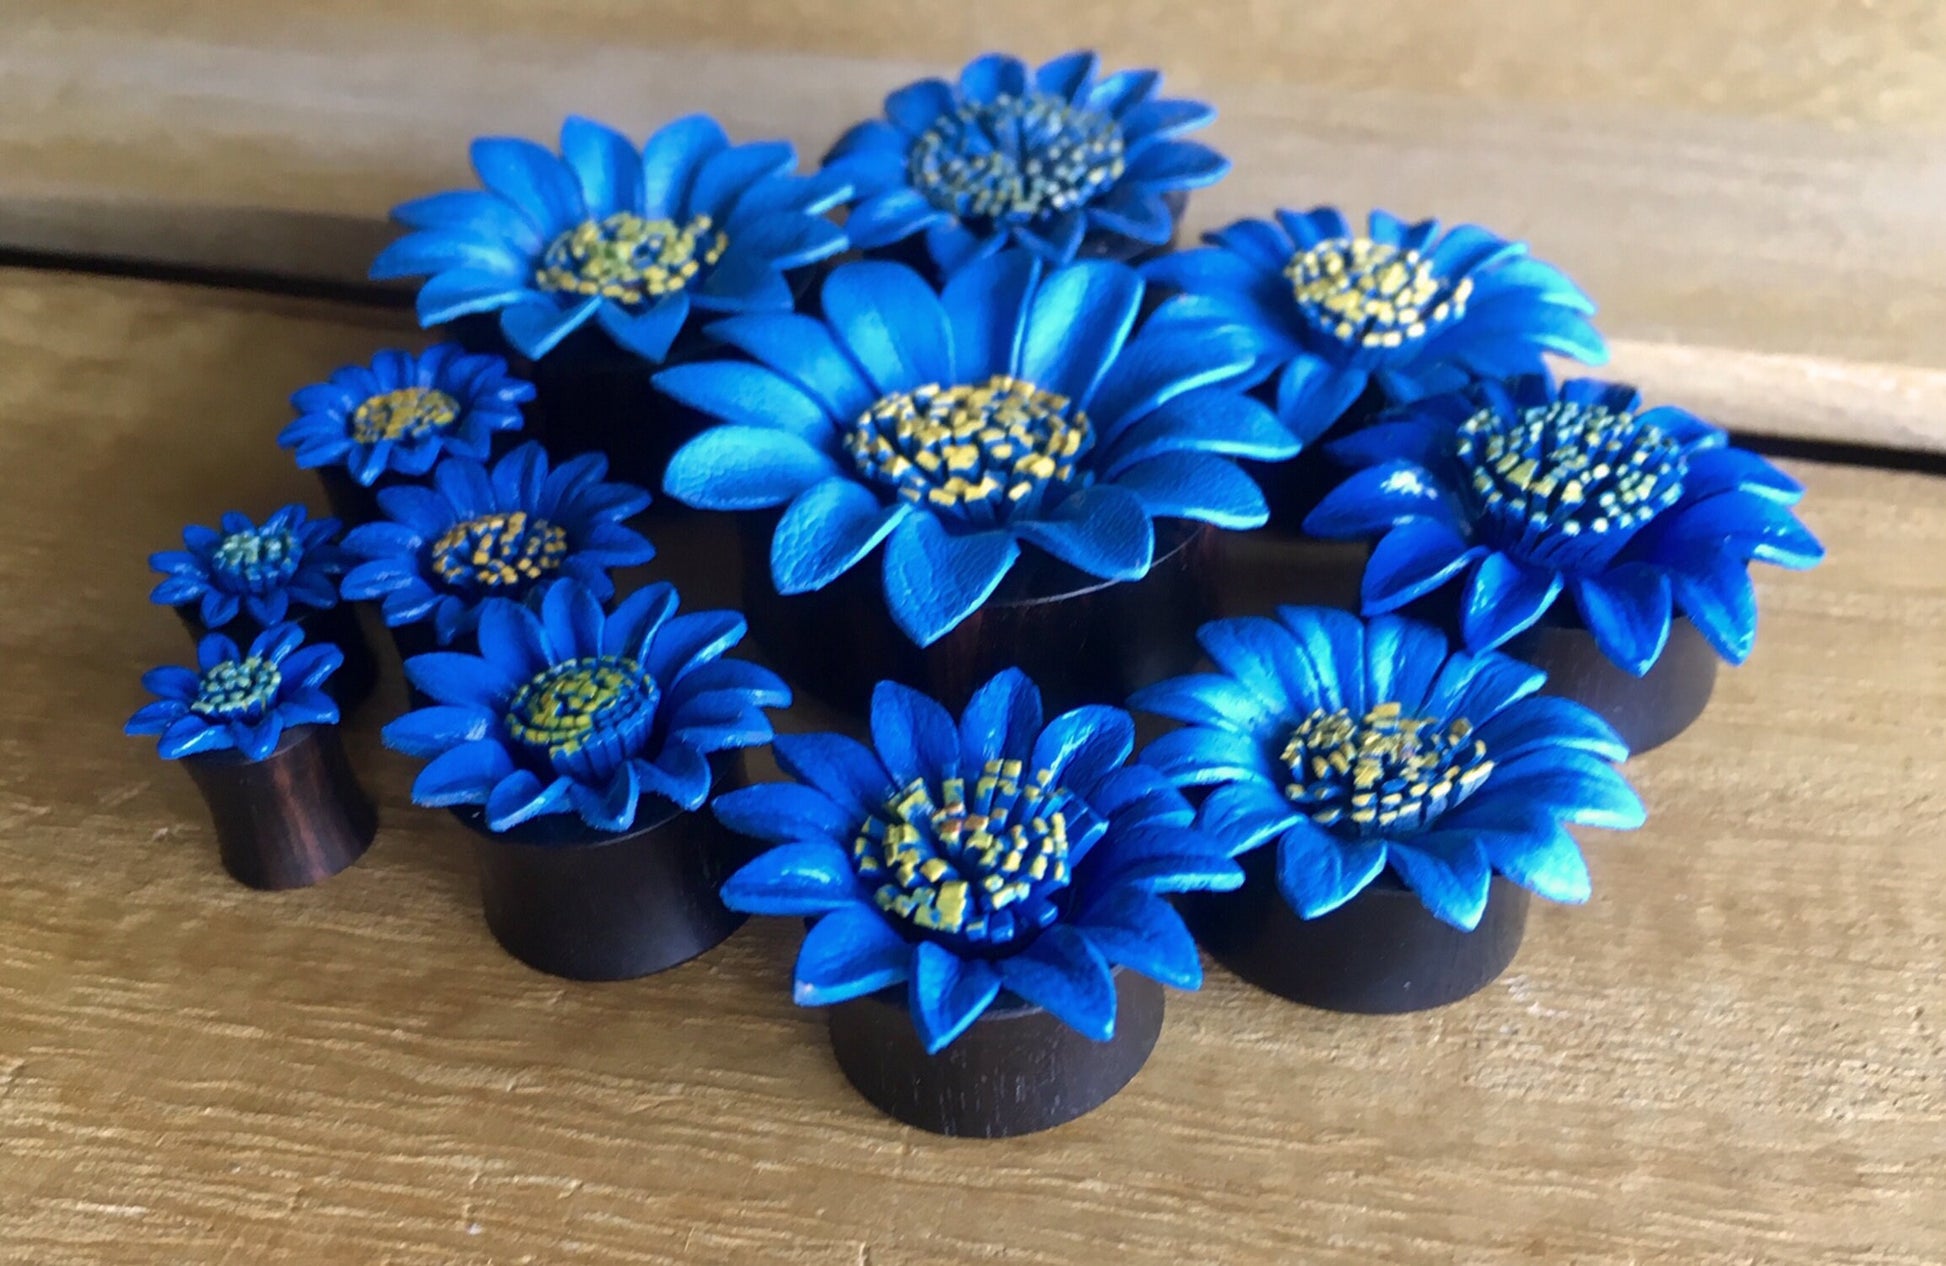 PAIR of Stunning Blue Leather Flower and Organic Horn Plugs - Gauges 0g (8mm) up to 1&1/4" (32mm) available!